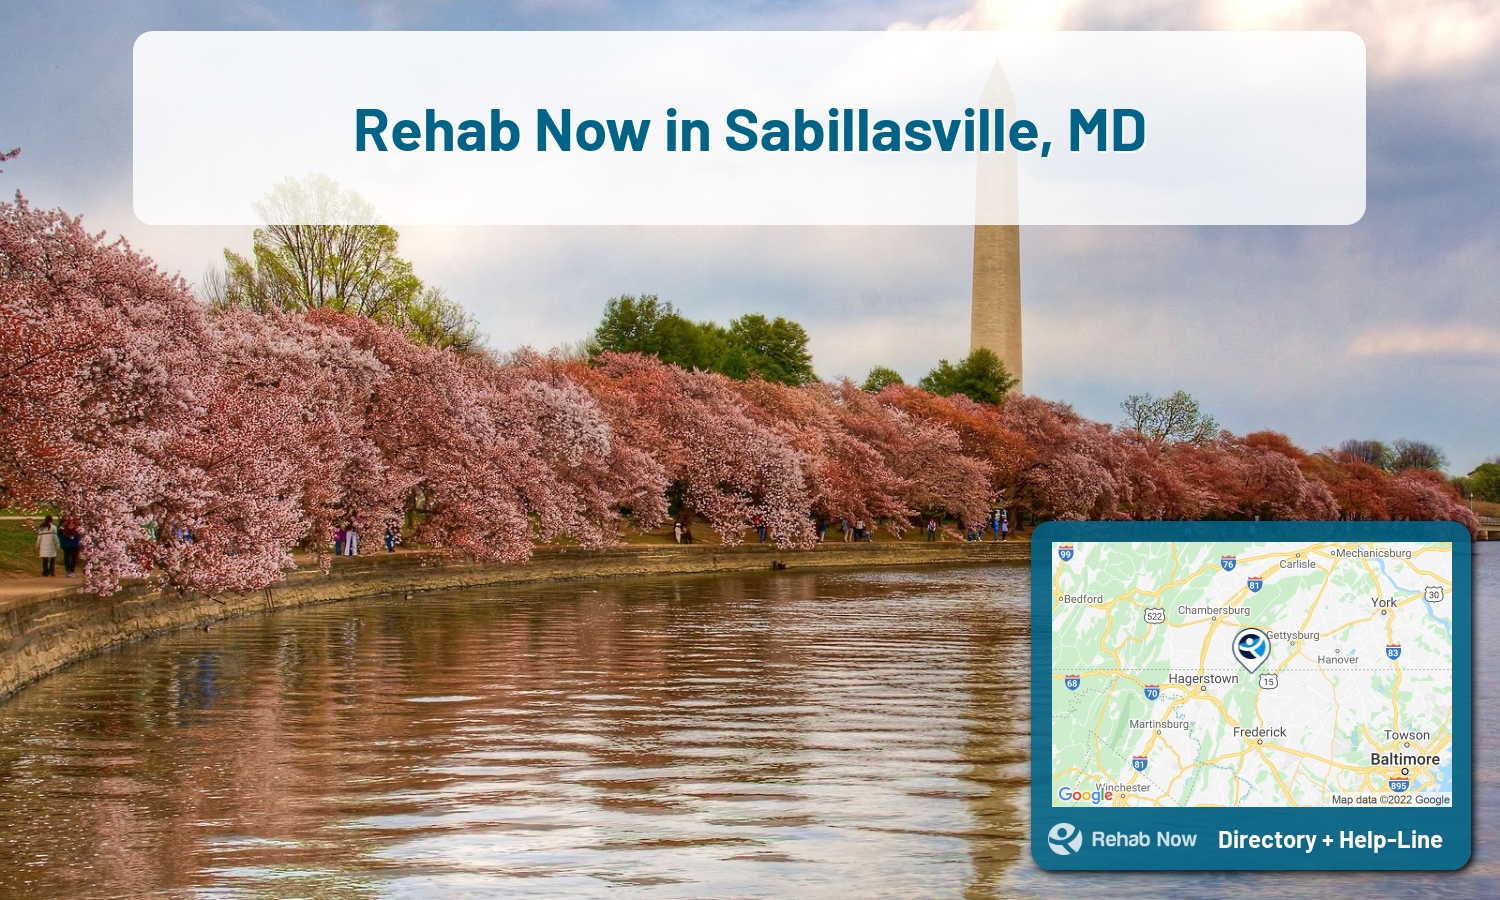 Need treatment nearby in Sabillasville, Maryland? Choose a drug/alcohol rehab center from our list, or call our hotline now for free help.